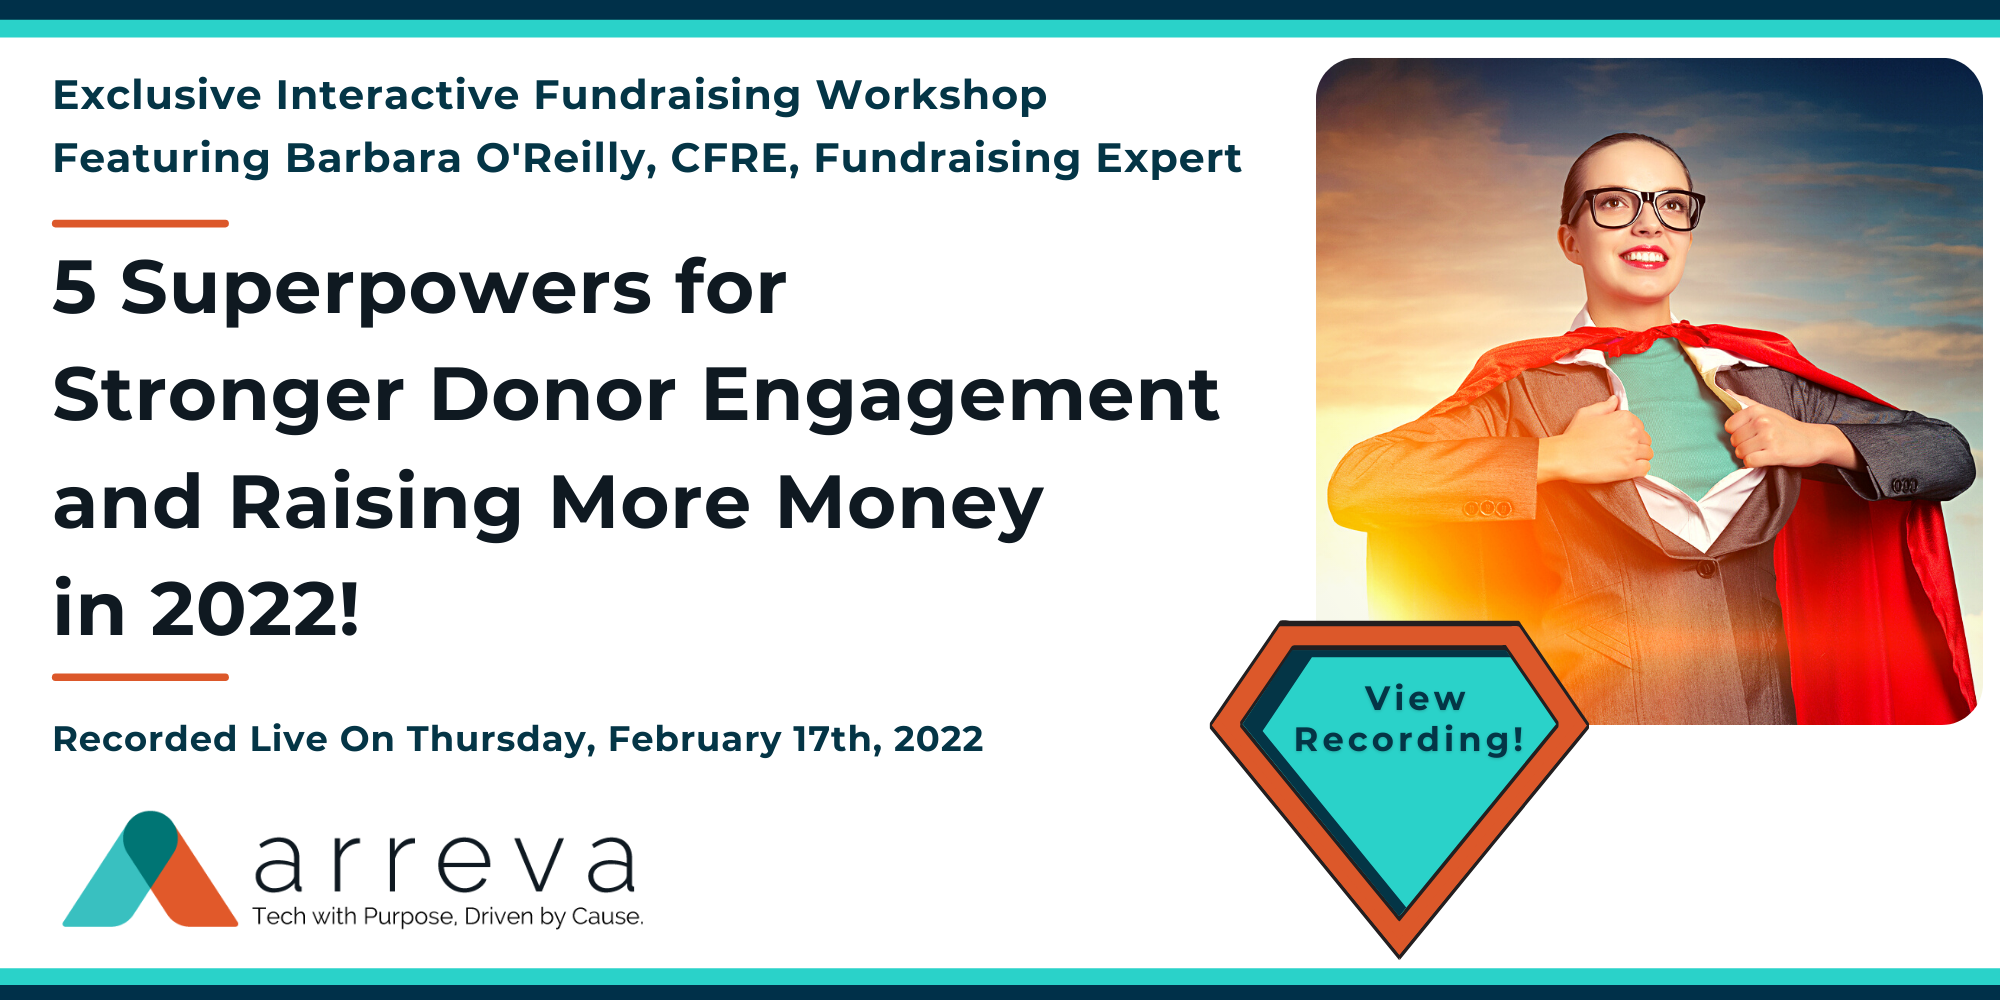 Rev 6.1email  Feb 2022  Arreva Webinar - Exclusive, Interactive Fundraising Workshop - 5 Superpowers for 2022 -  Featuring Barbara OReilly, Fundraising Expert   -1